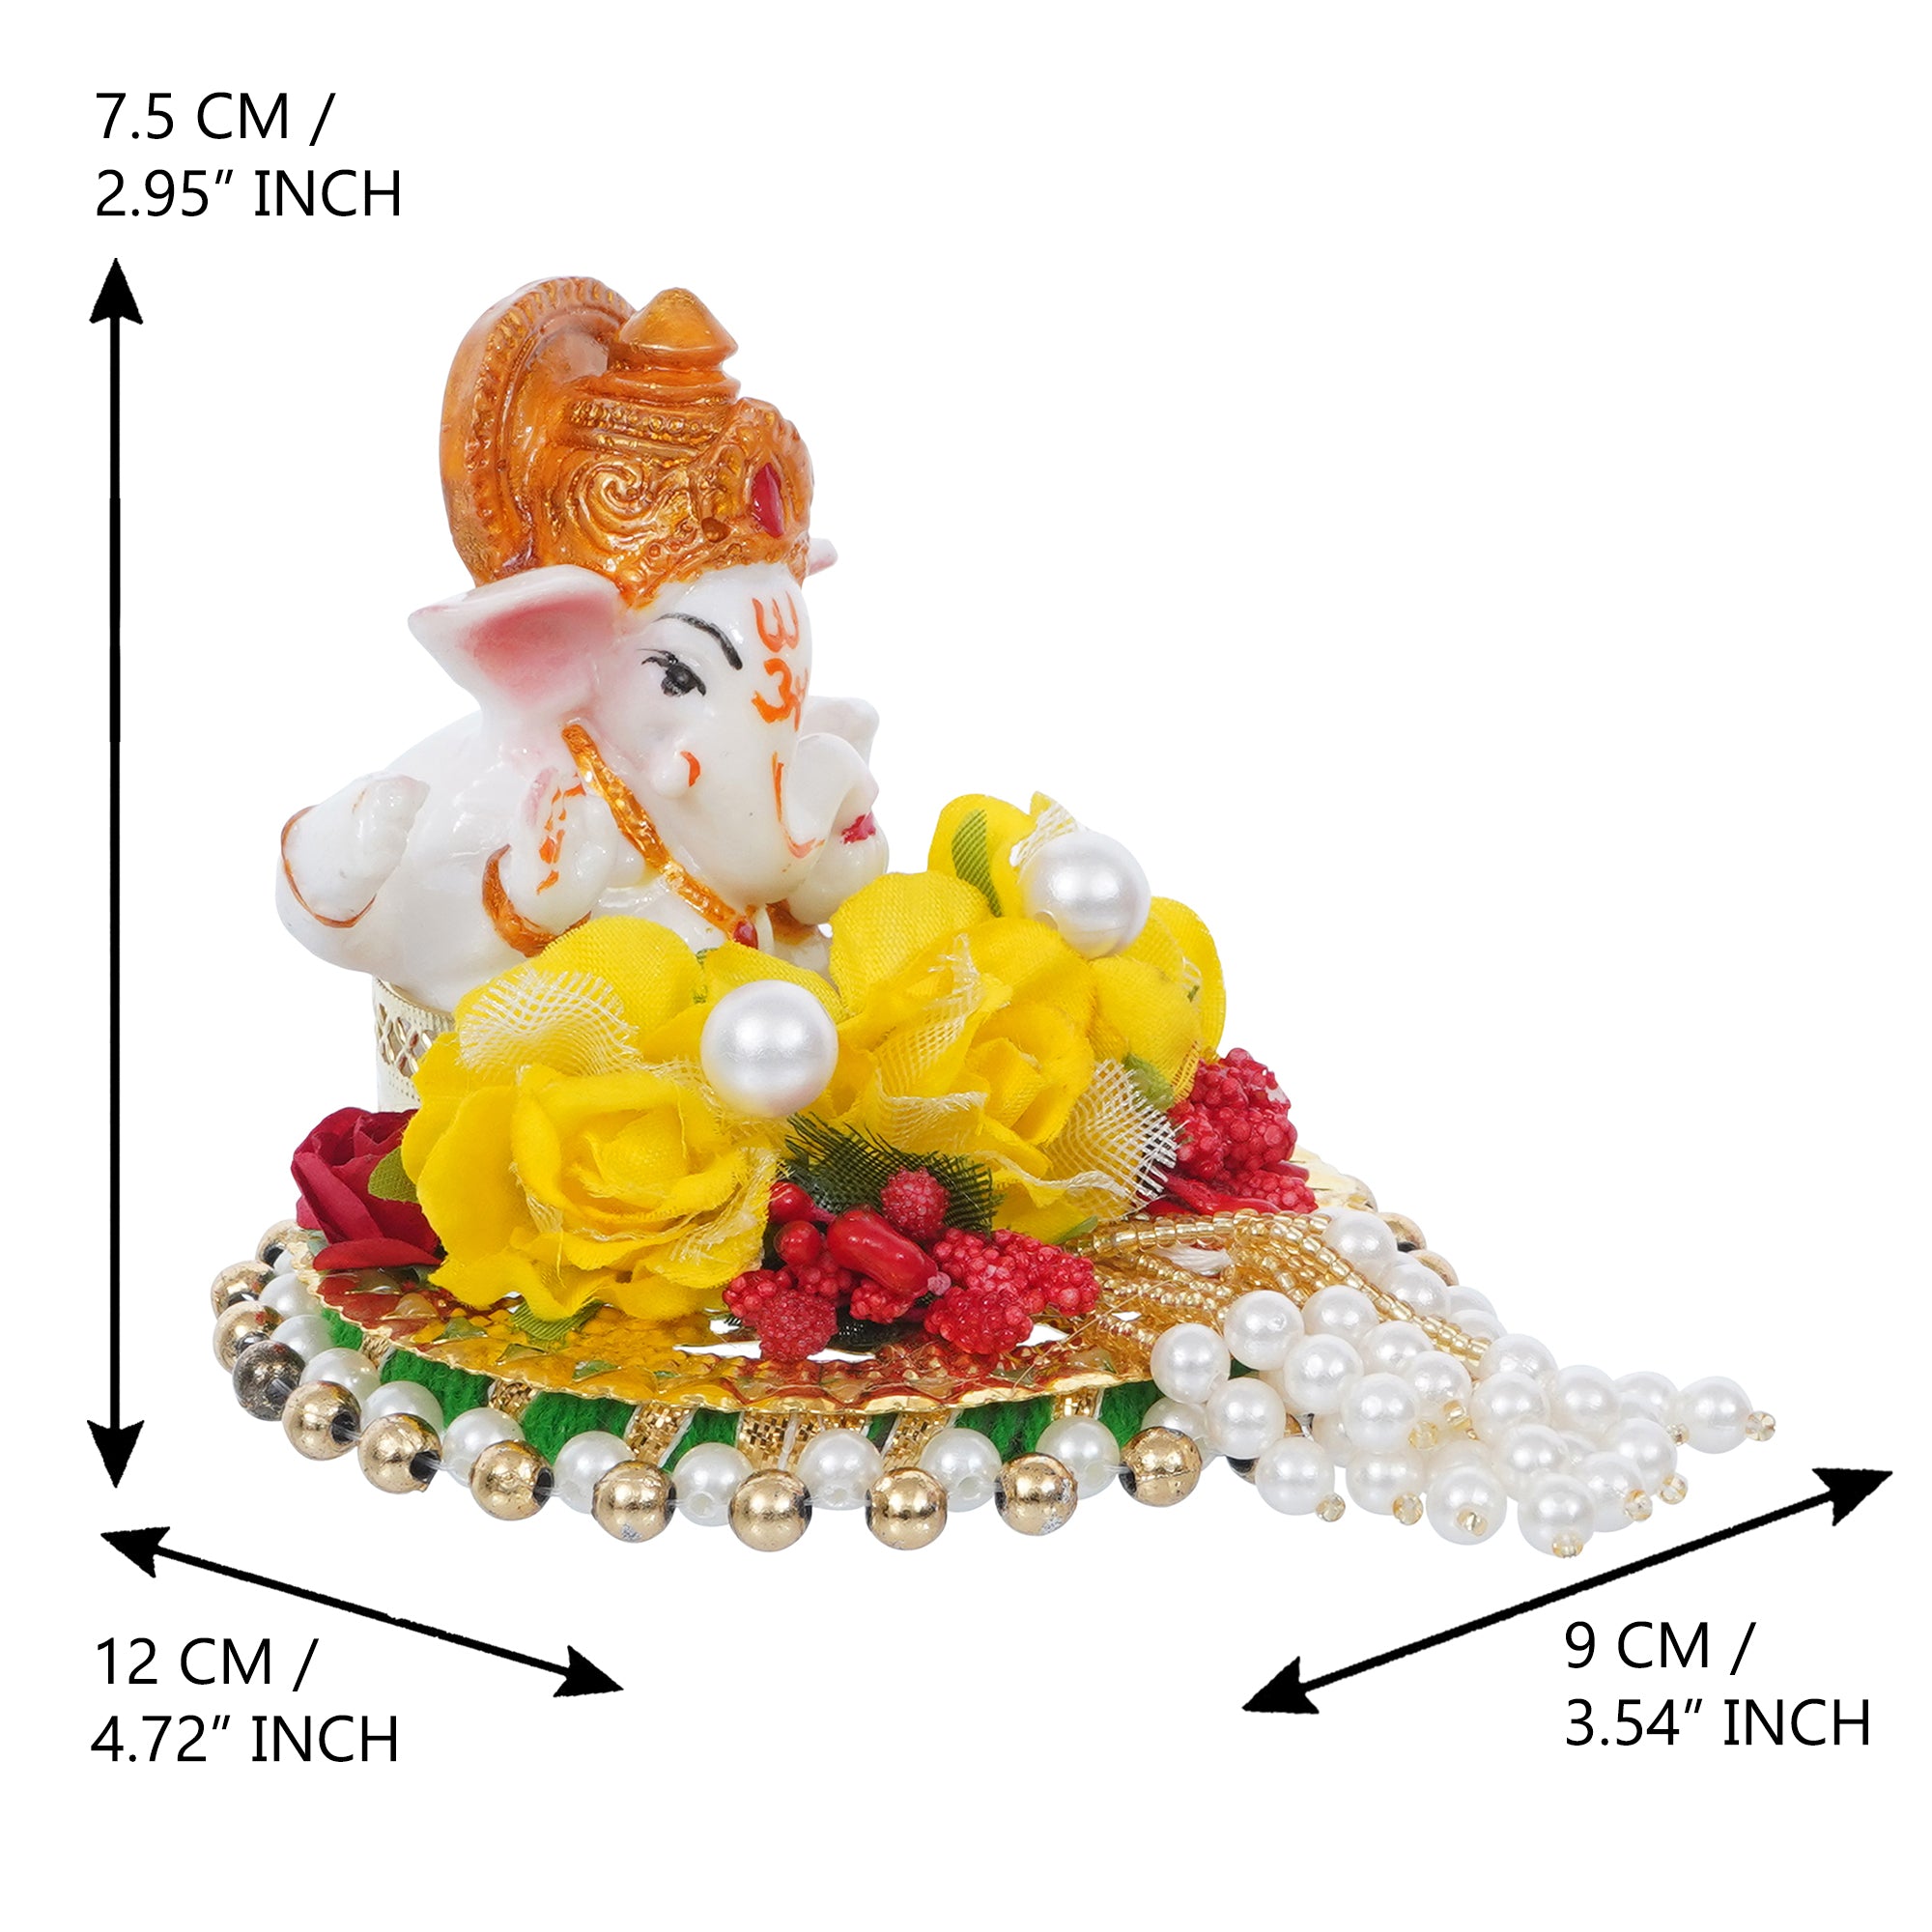 Lord Ganesha Idol on Decorative Handcrafted Plate with Colorful Flowers 3